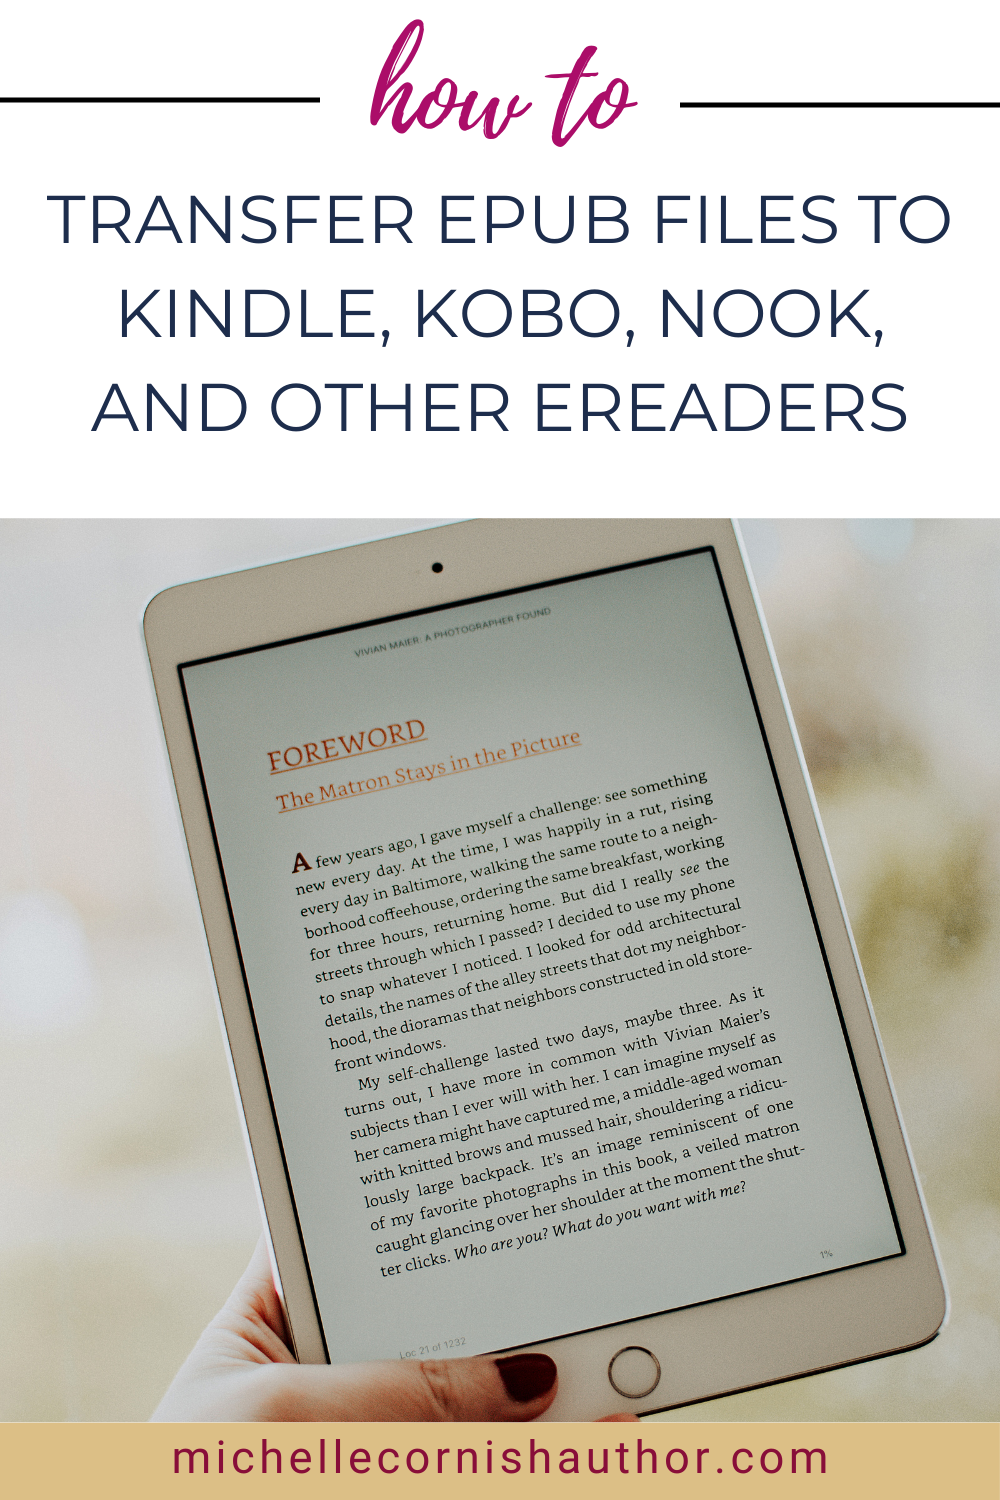 How to transfer epub files to your ereader